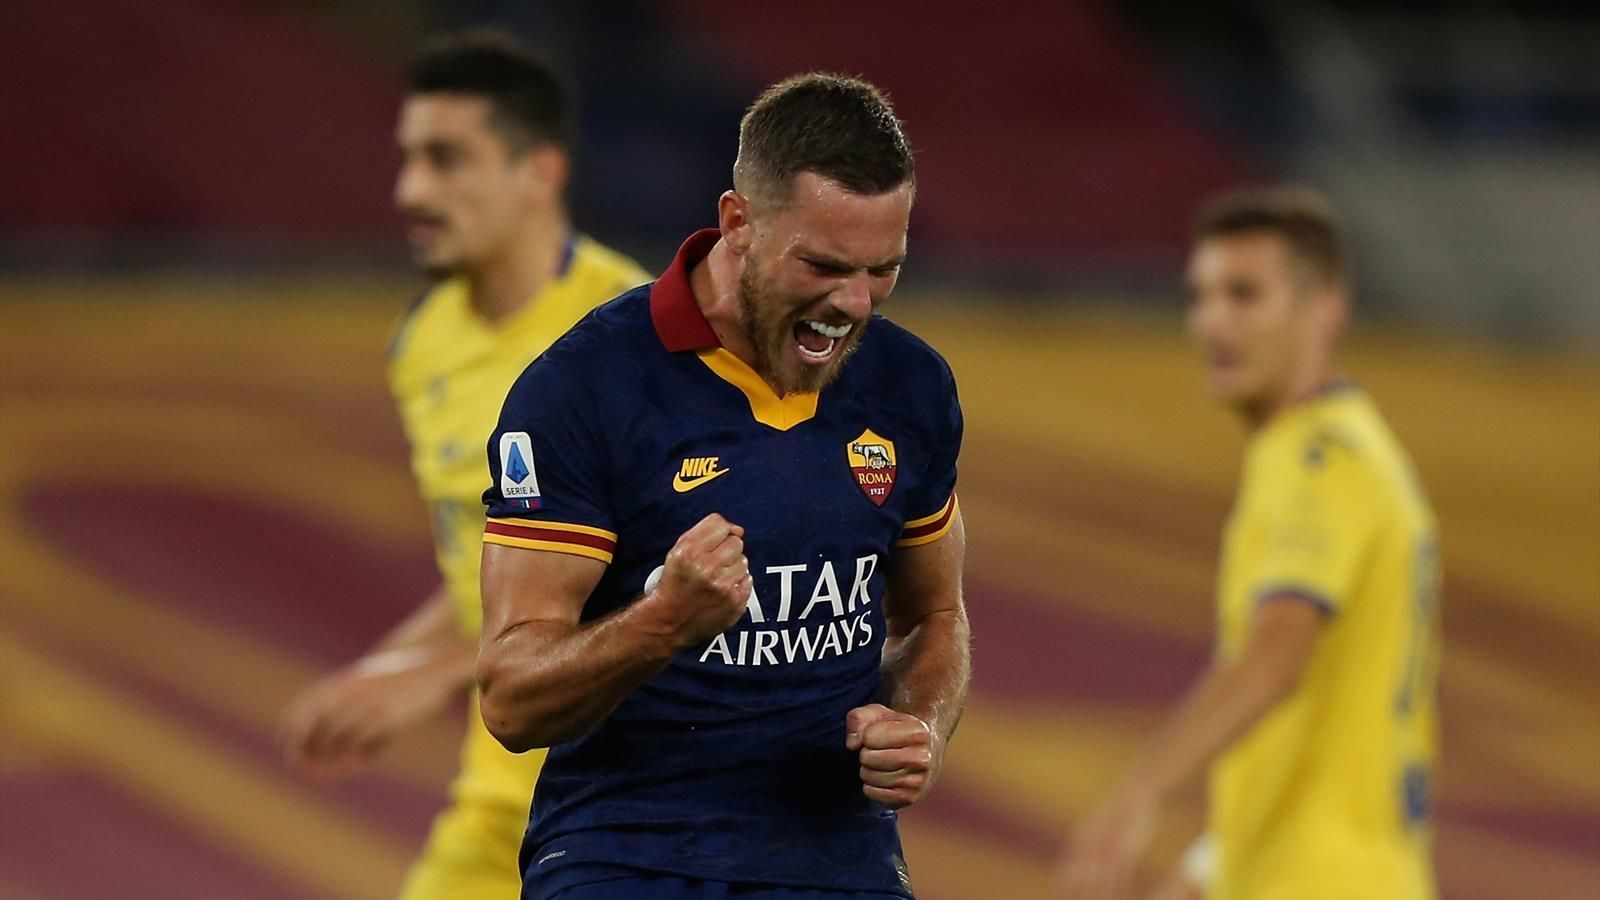 Roma and Fiorentina Secure Clean Victories but Udinese and Lazio Play a Scoreless Draw